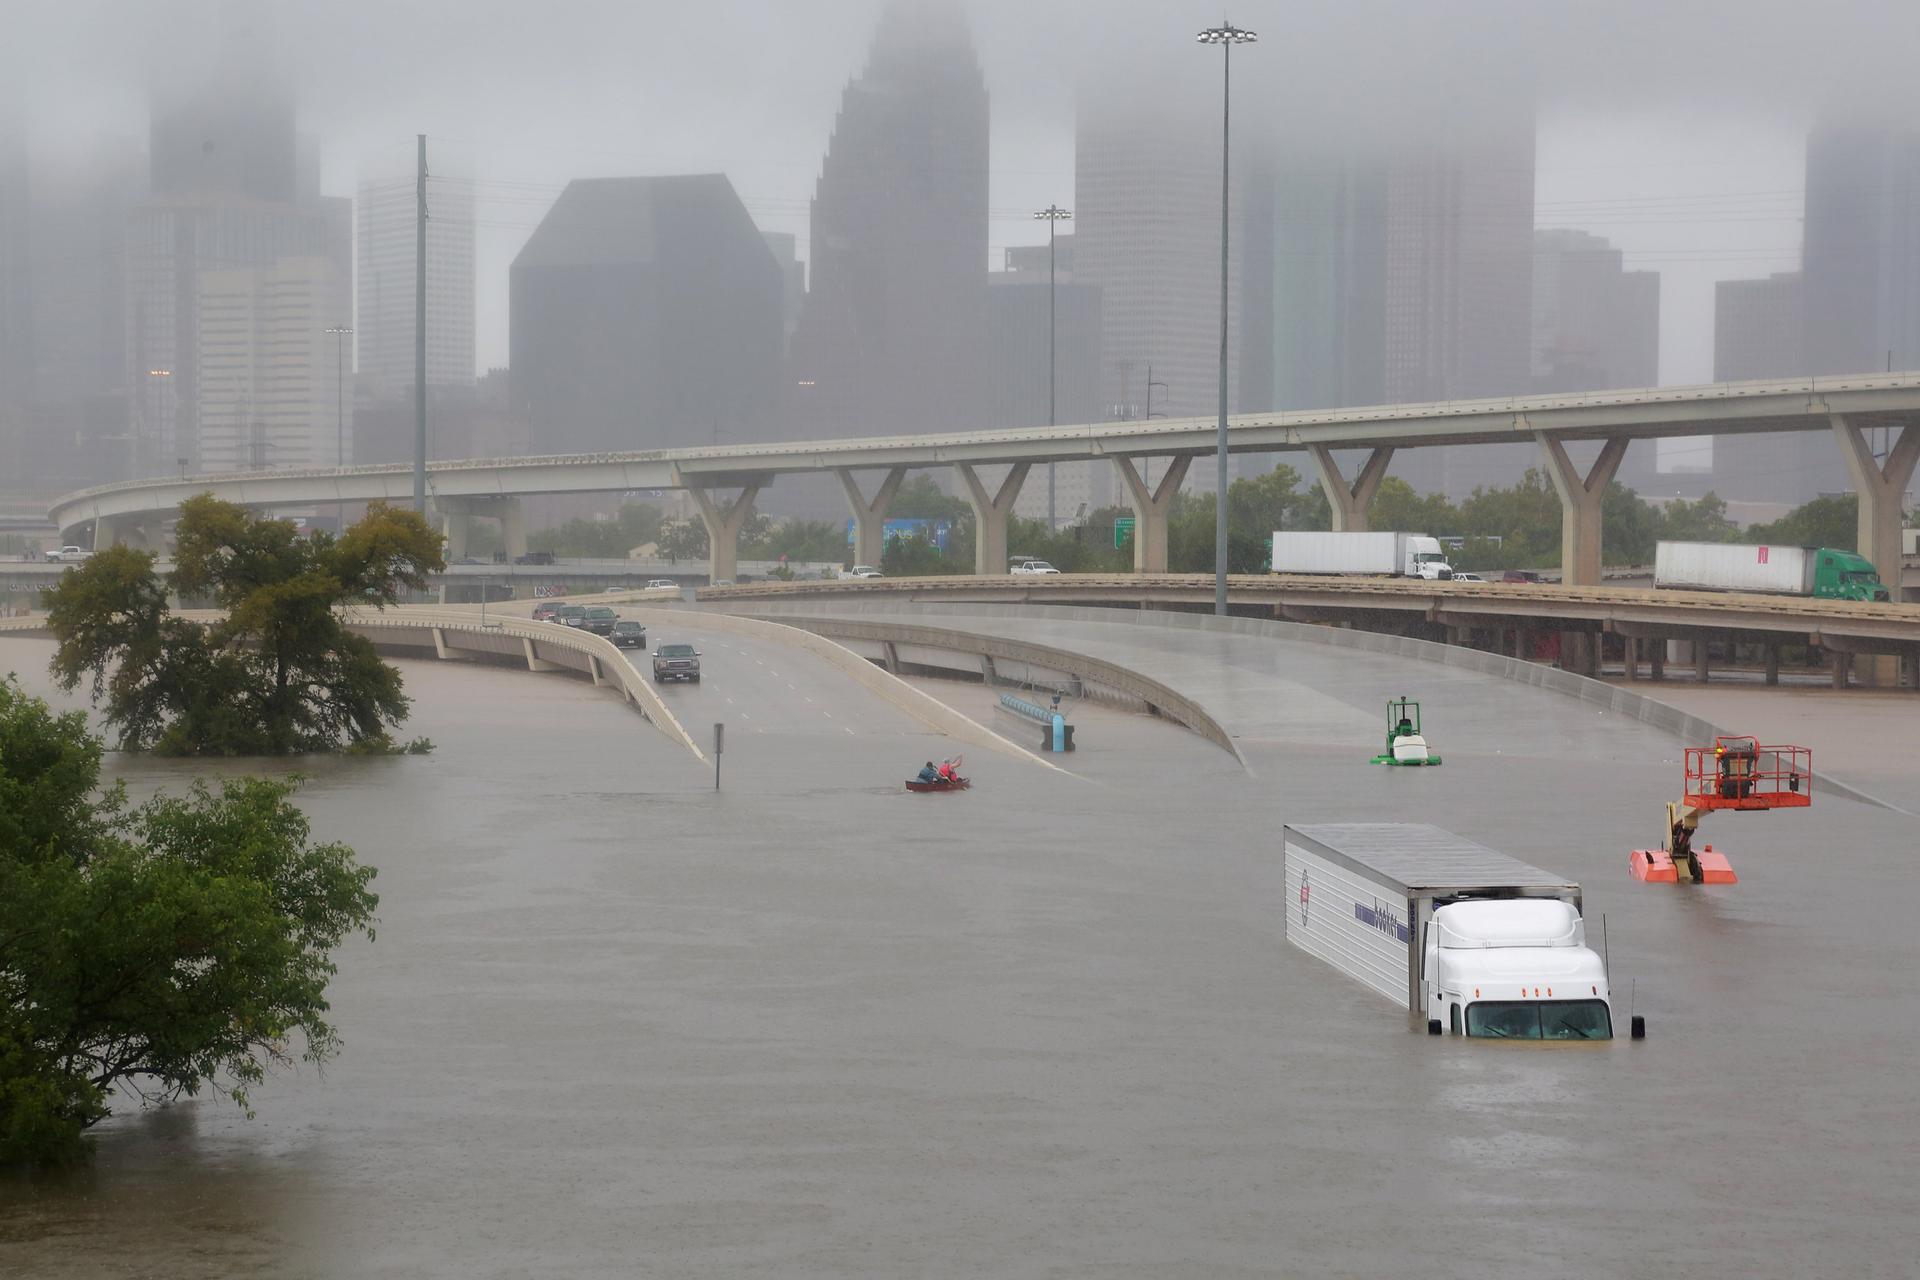 Interstate highway 45 is submerged from the effects of Hurricane Harvey.